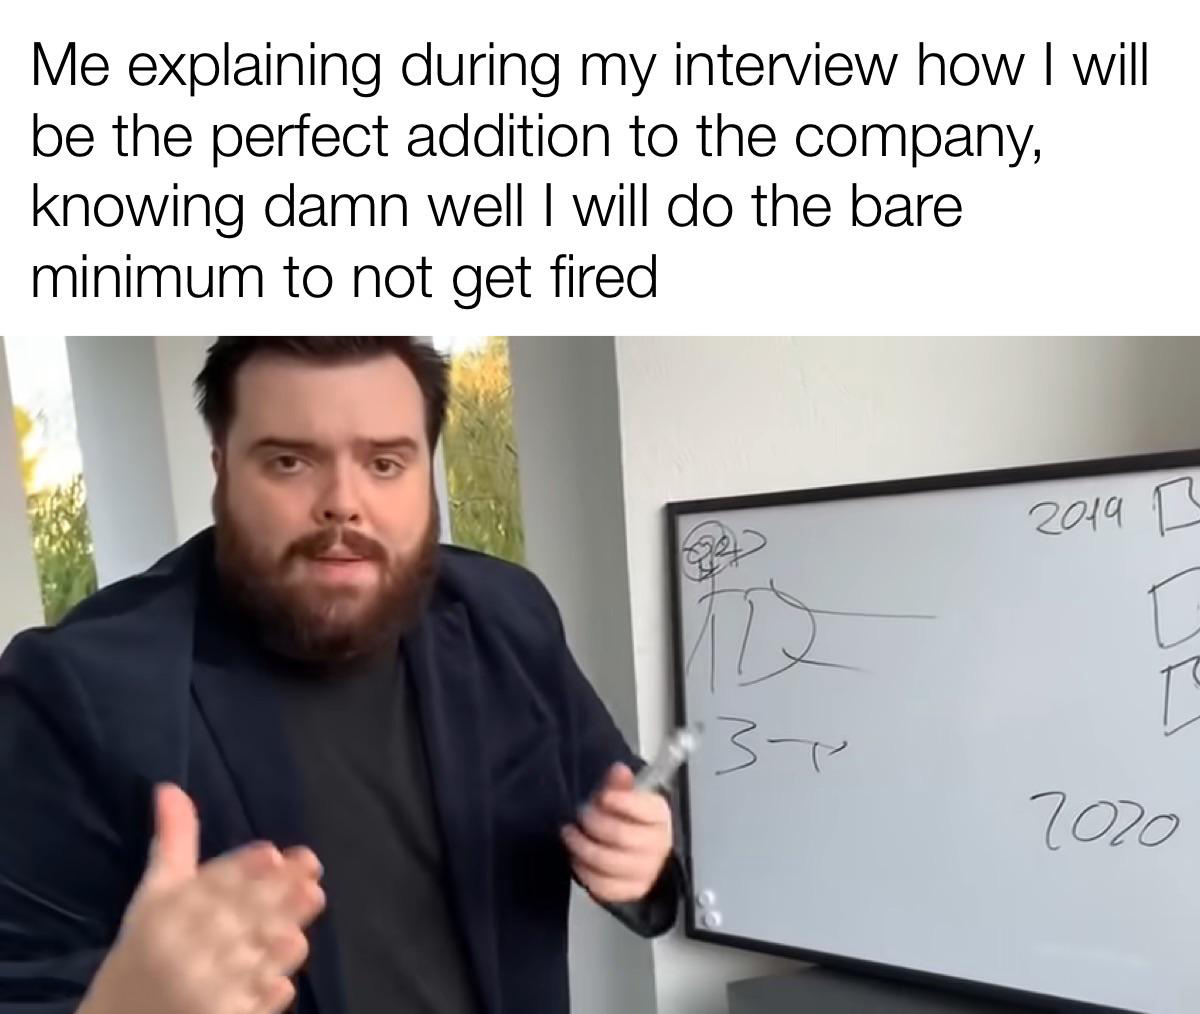 dank memes - company - Me explaining during my interview how I will be the perfect addition to the company, knowing damn well I will do the bare minimum to not get fired 3 2019 7020